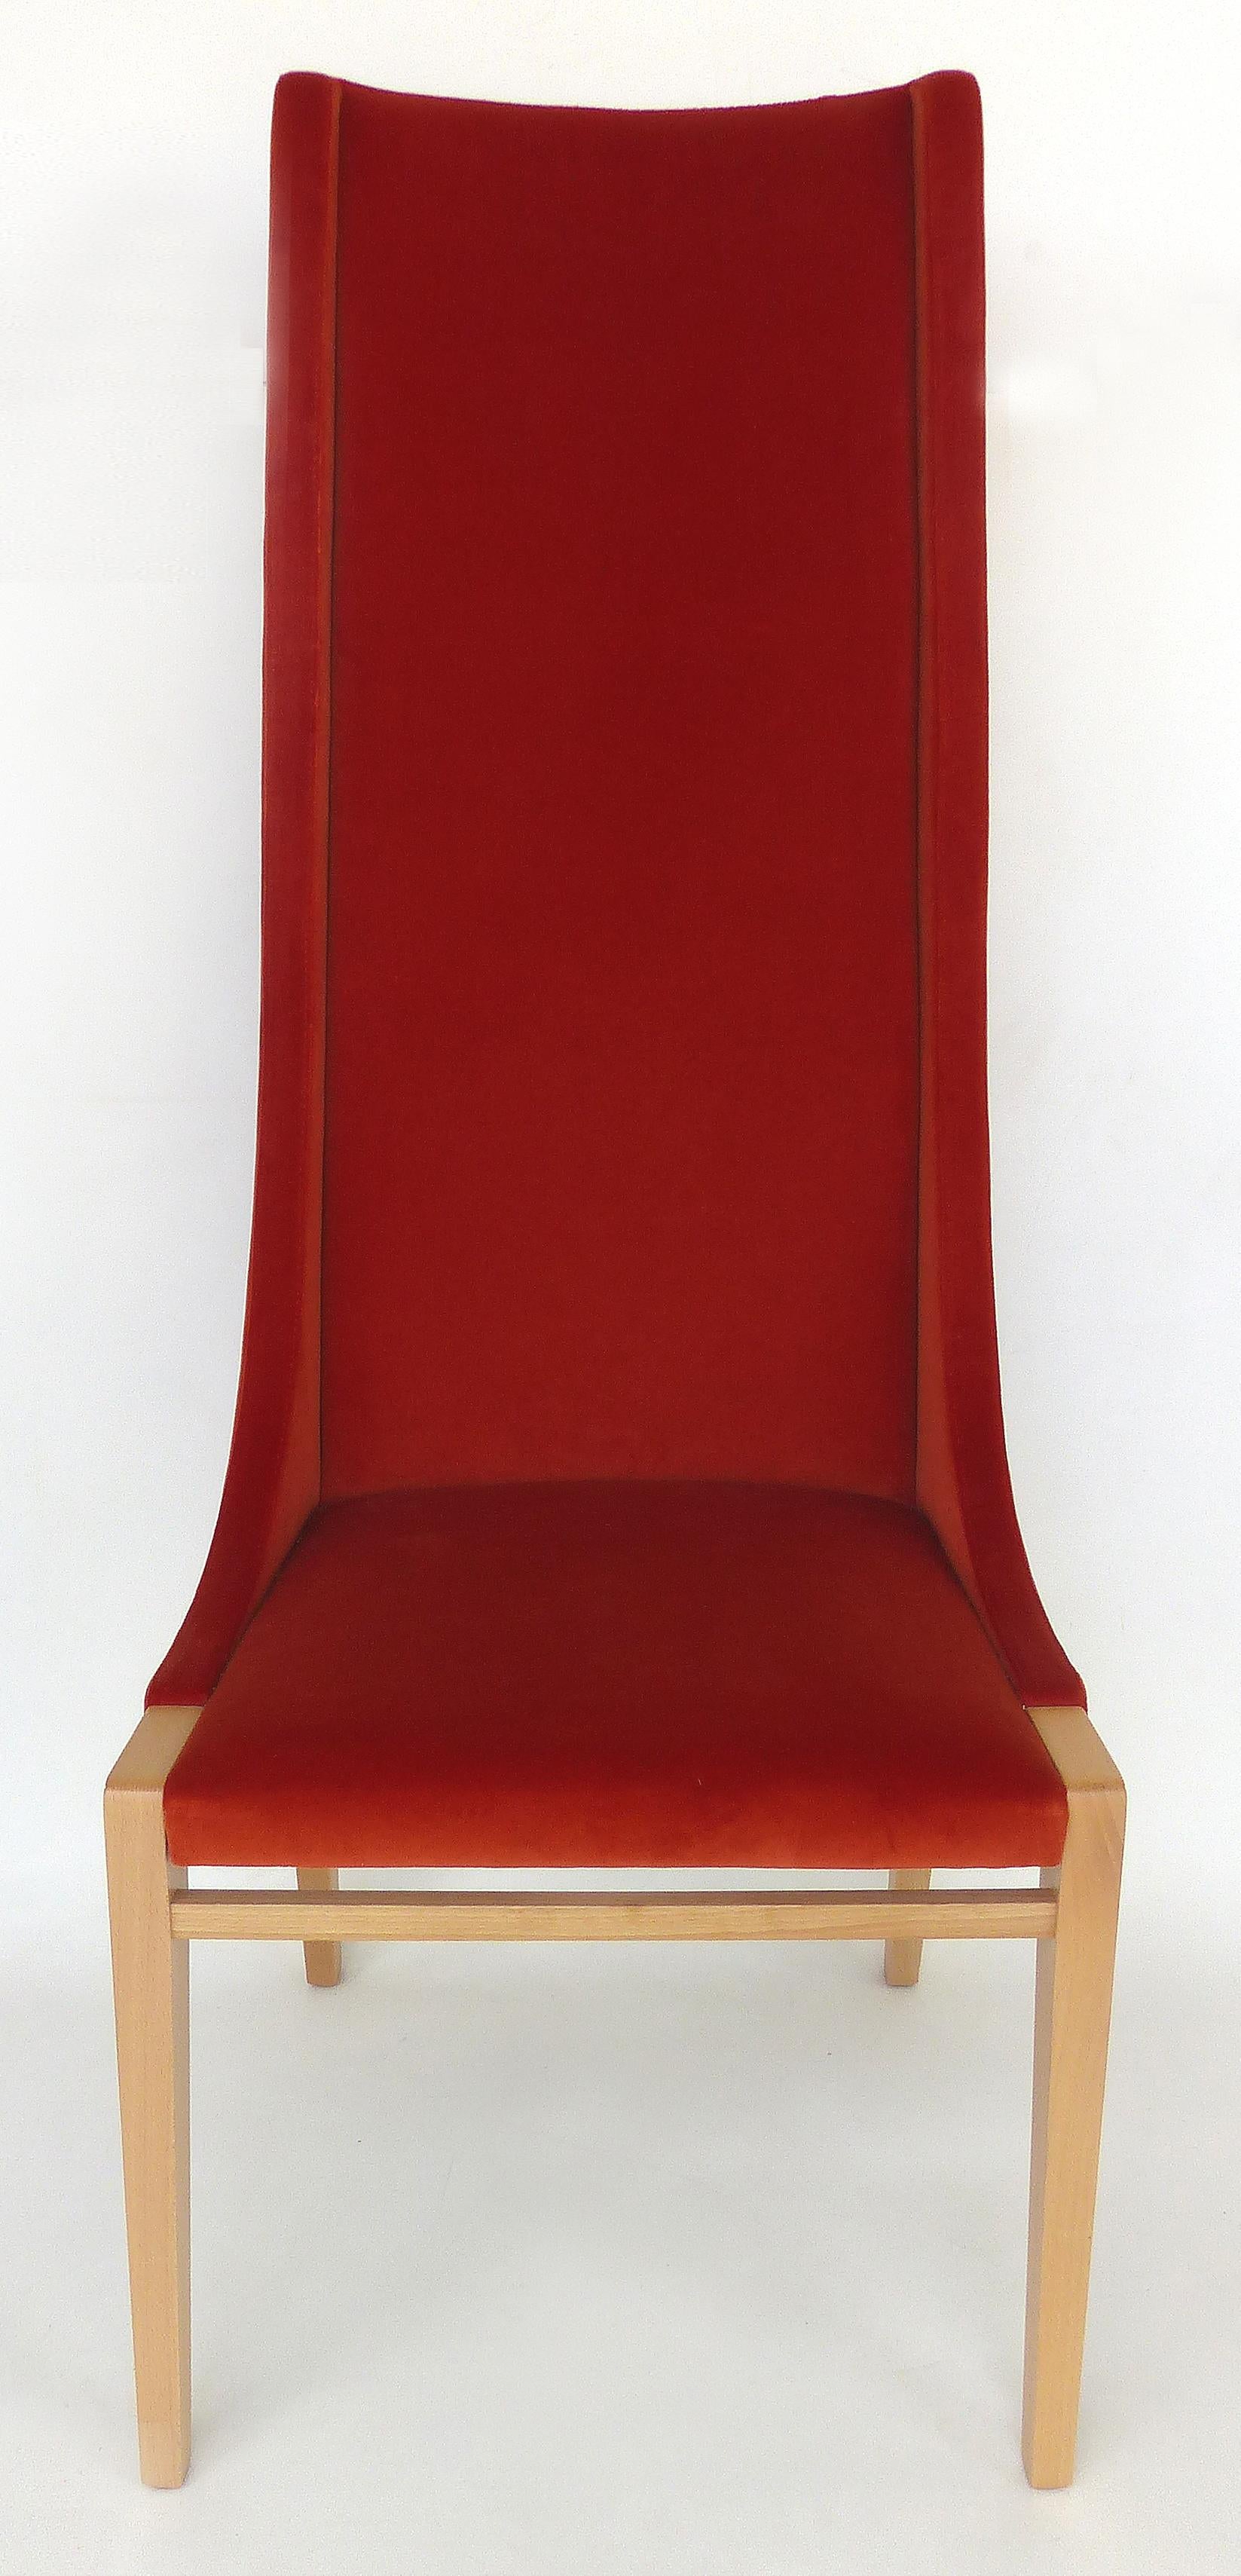  Pietro Constantini of Italy High Backed Upholstered Chair

Offered for sale is a high backed upholstered chair by Italian manufacturer Pietro Constantini. The tall stylized chair has subtle sides which gracefully flow downward to the sides of the